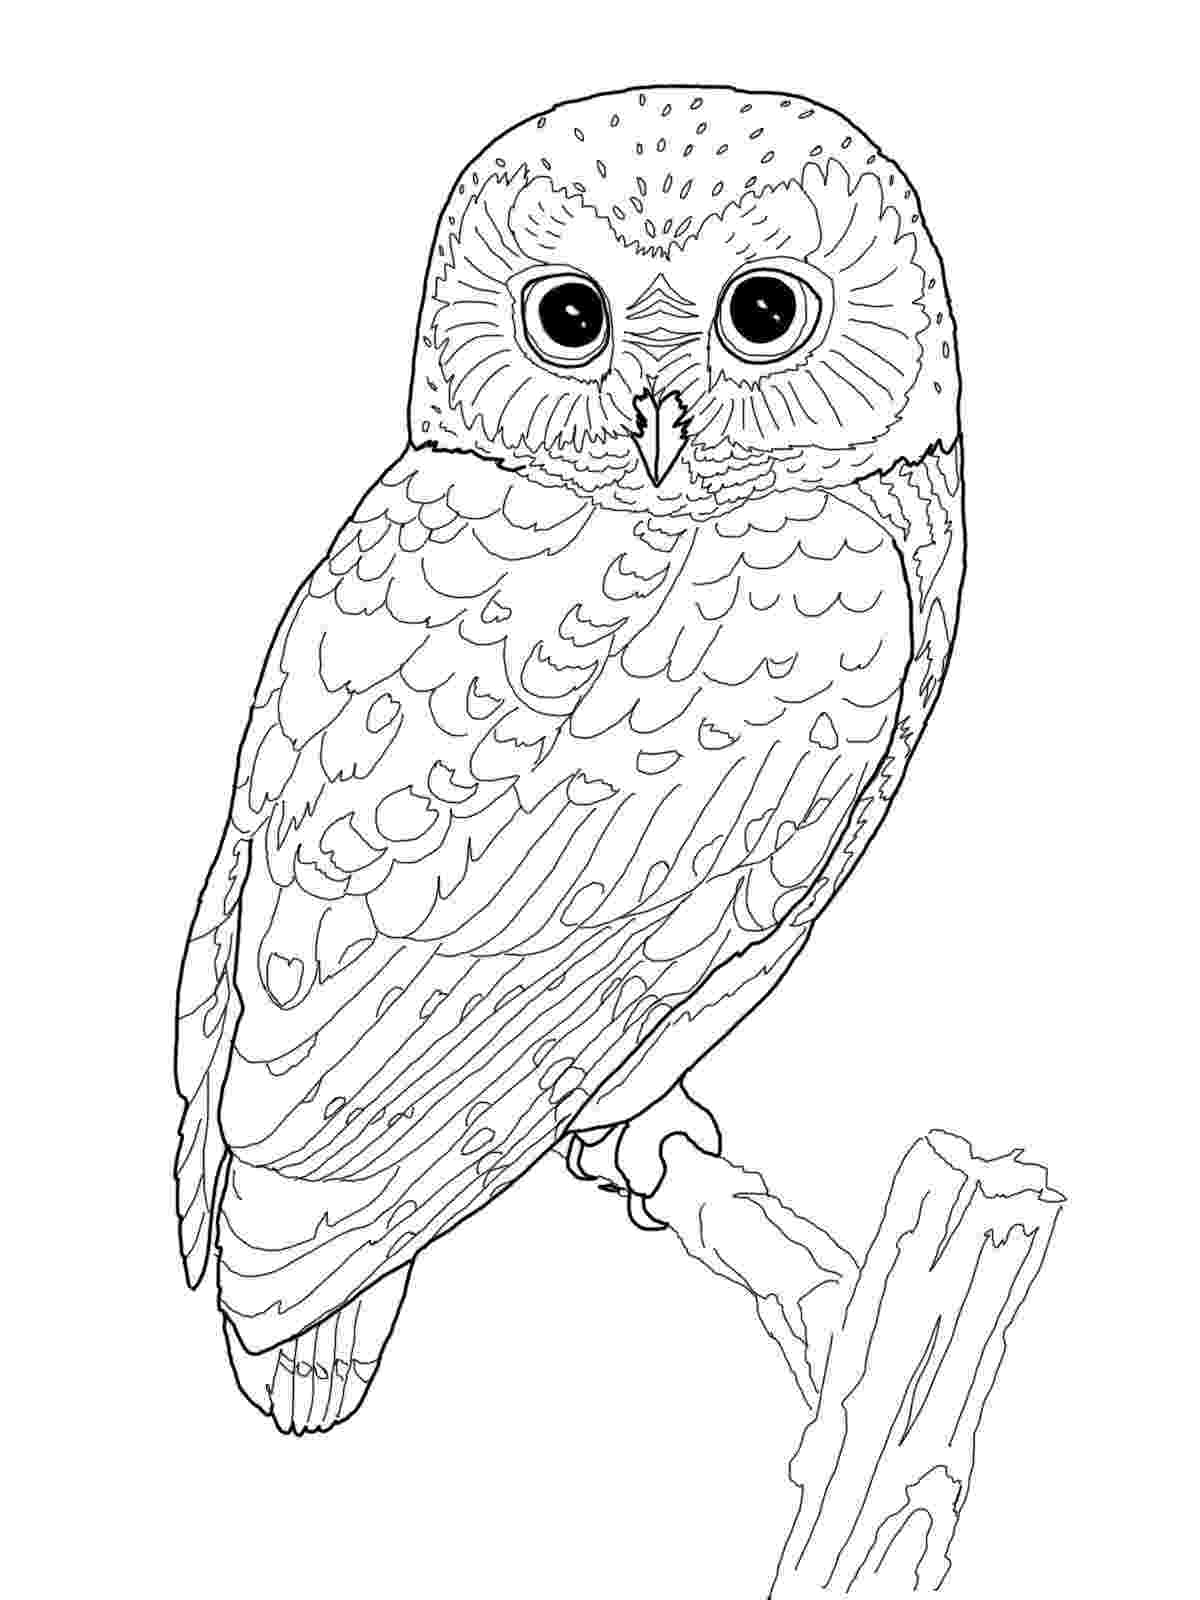 printable owl images cute owl coloring page free printable coloring pages printable owl images 